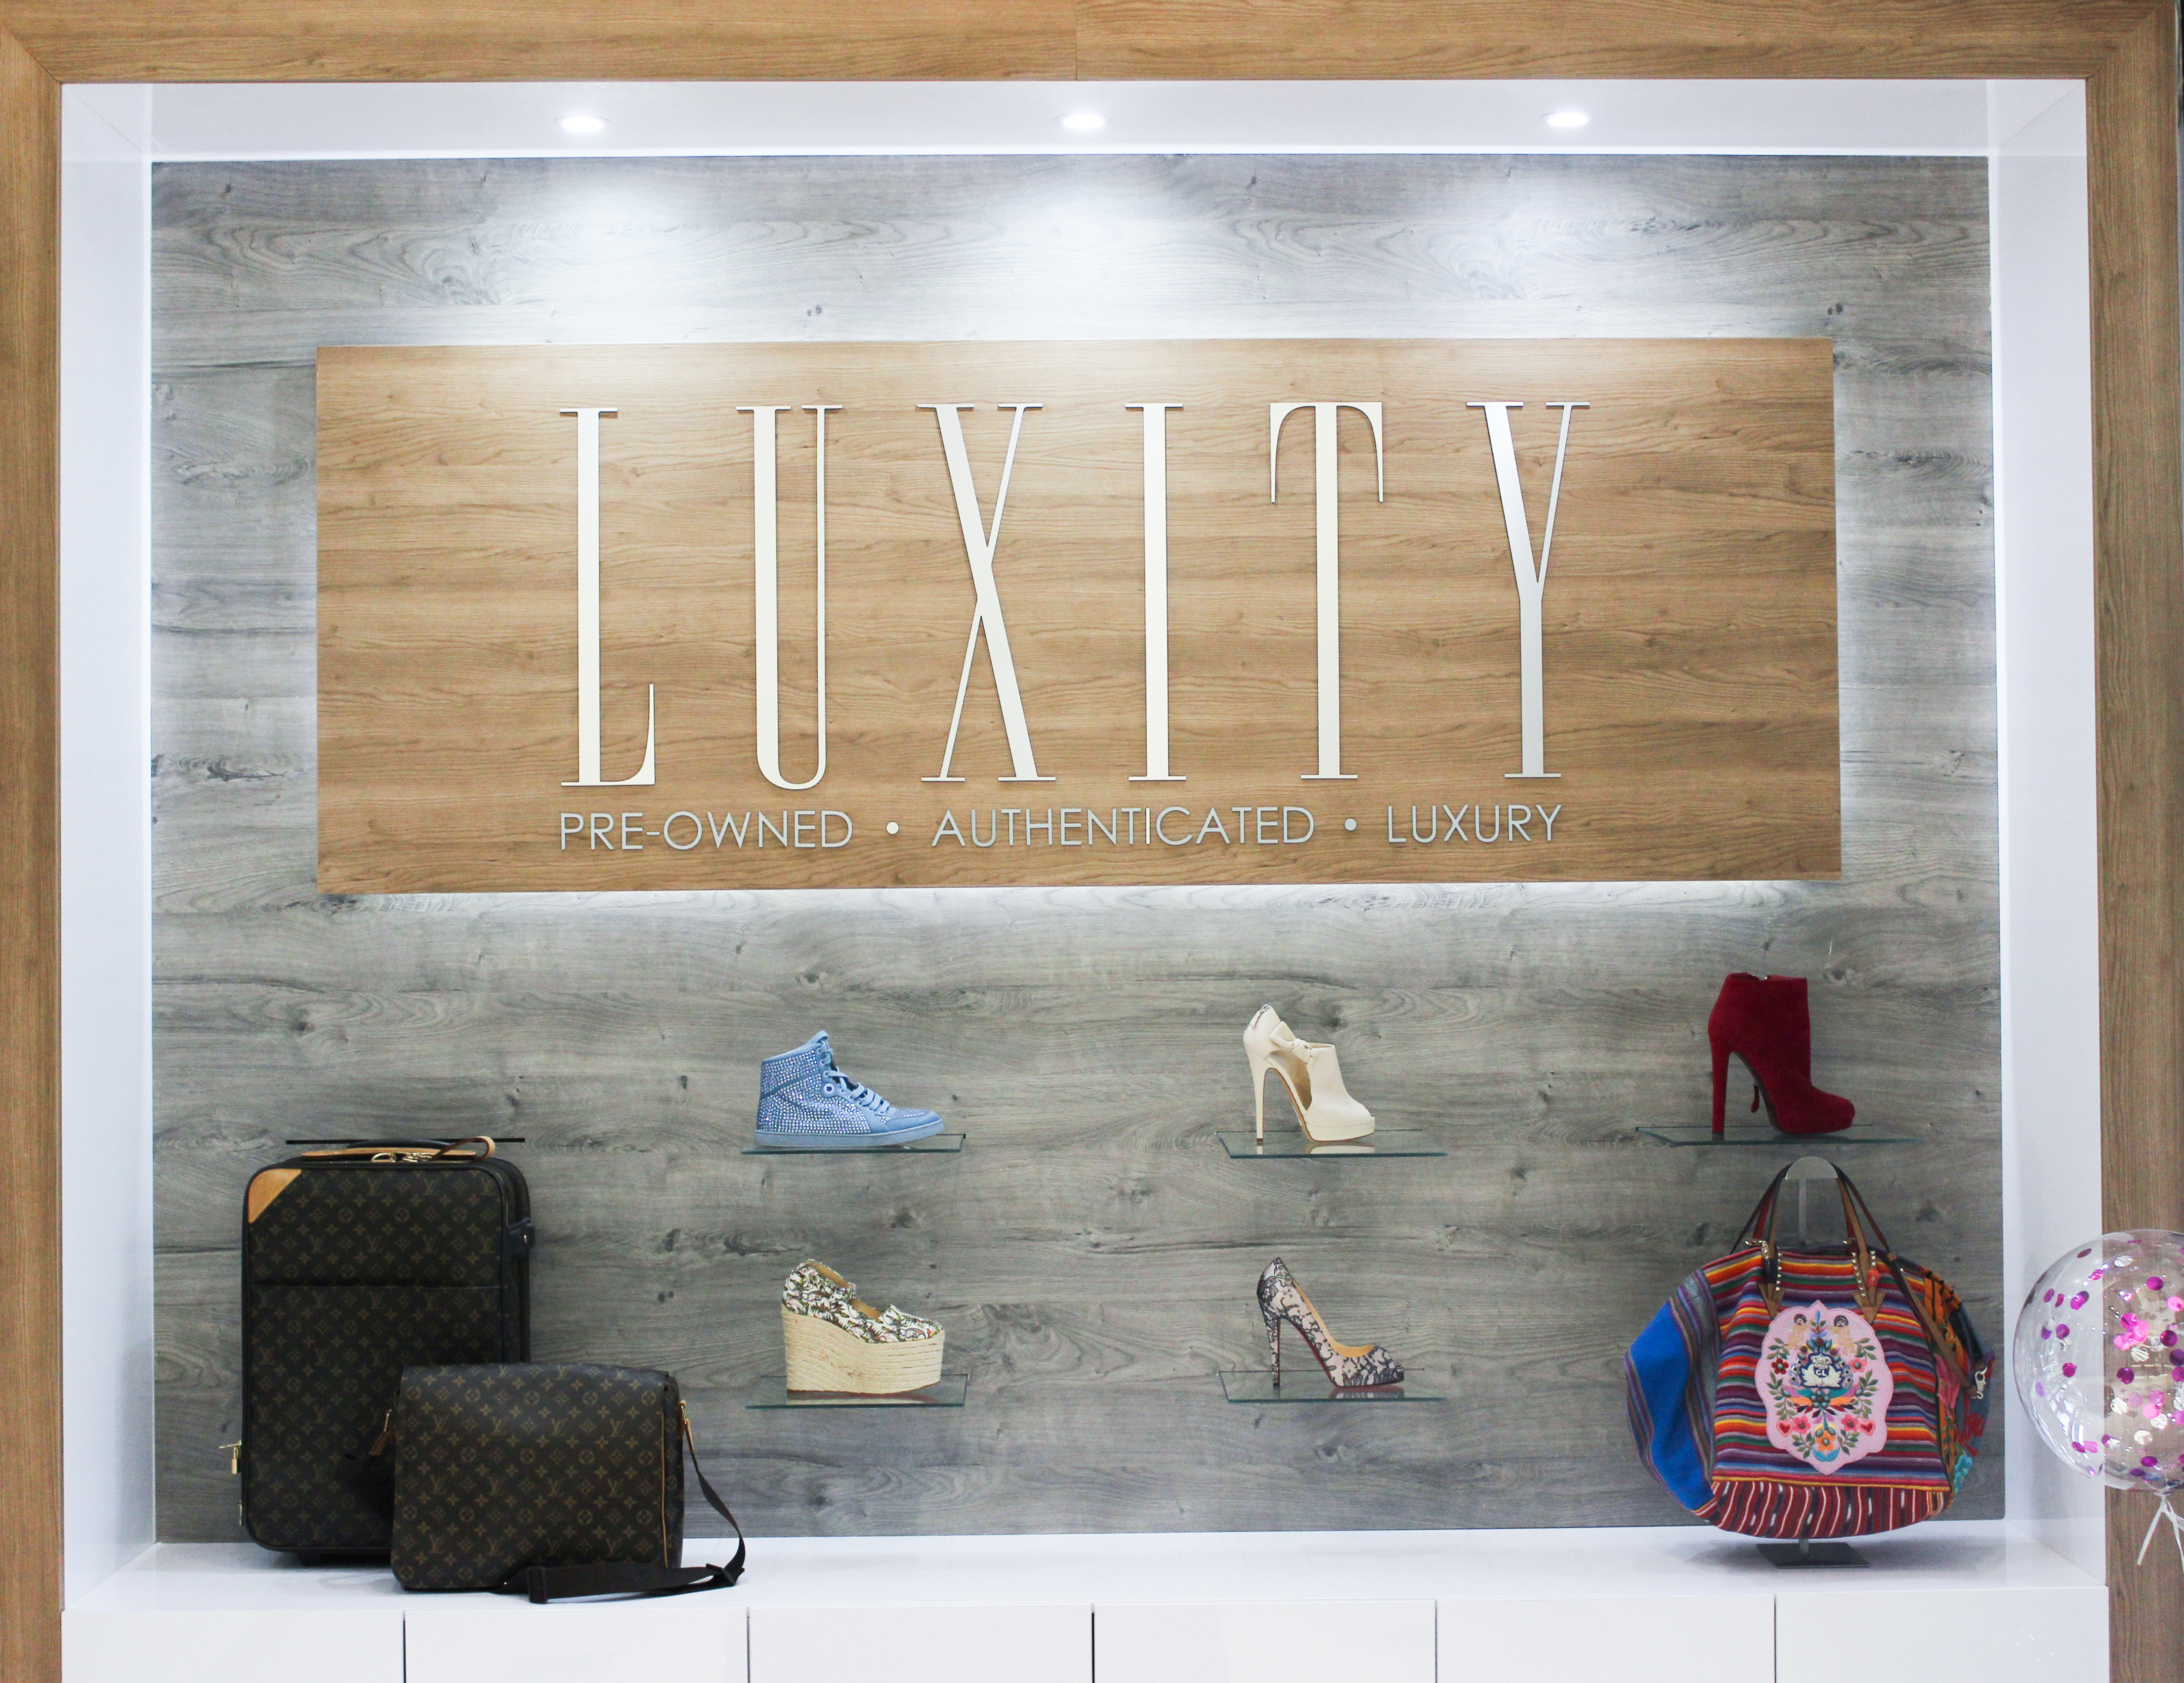 Luxity Cape Town